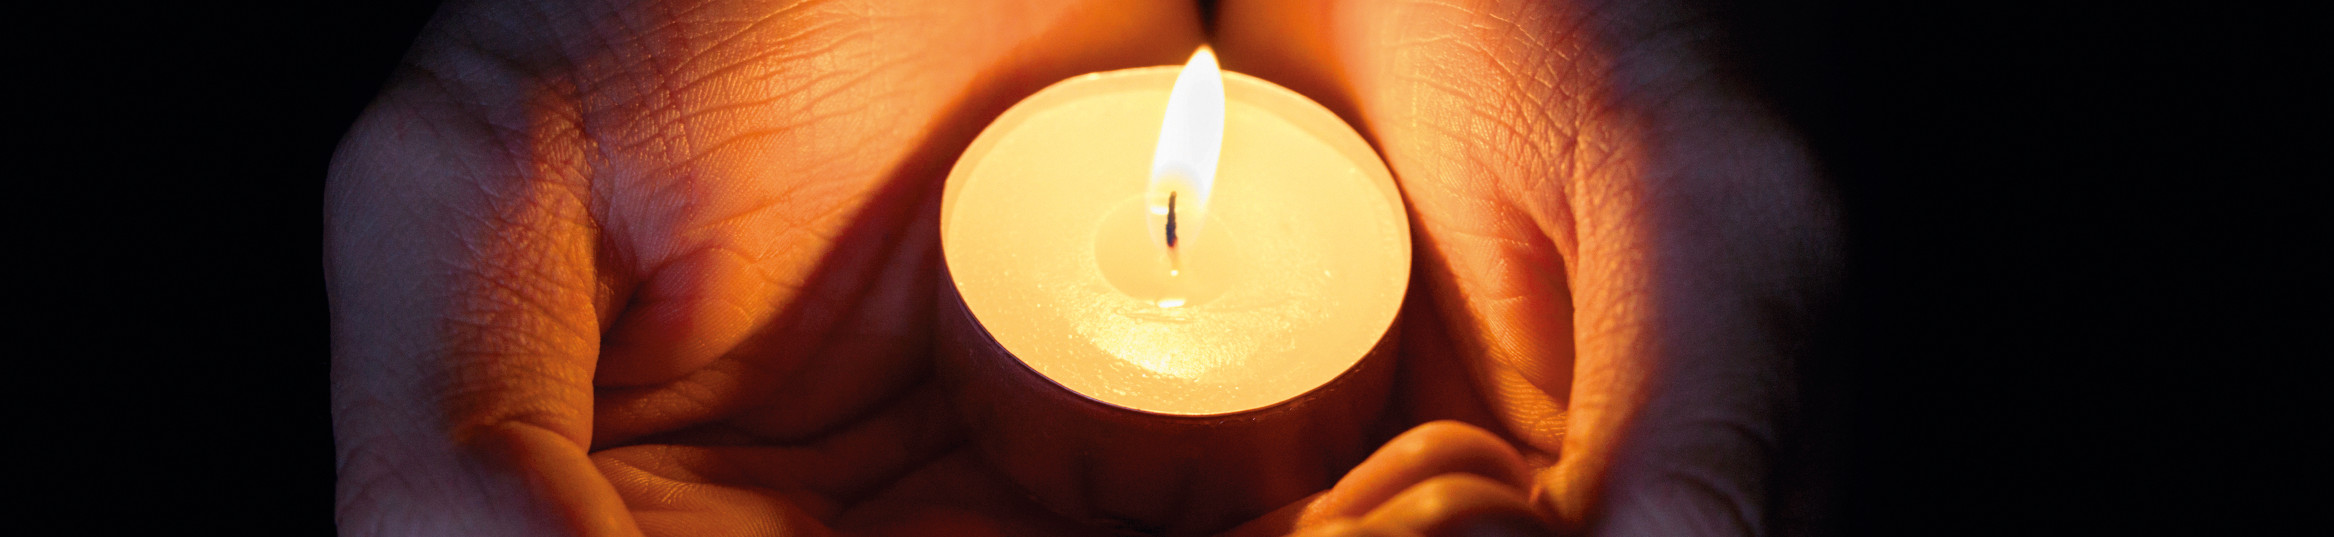 female teen hands holding burning candle in the dark